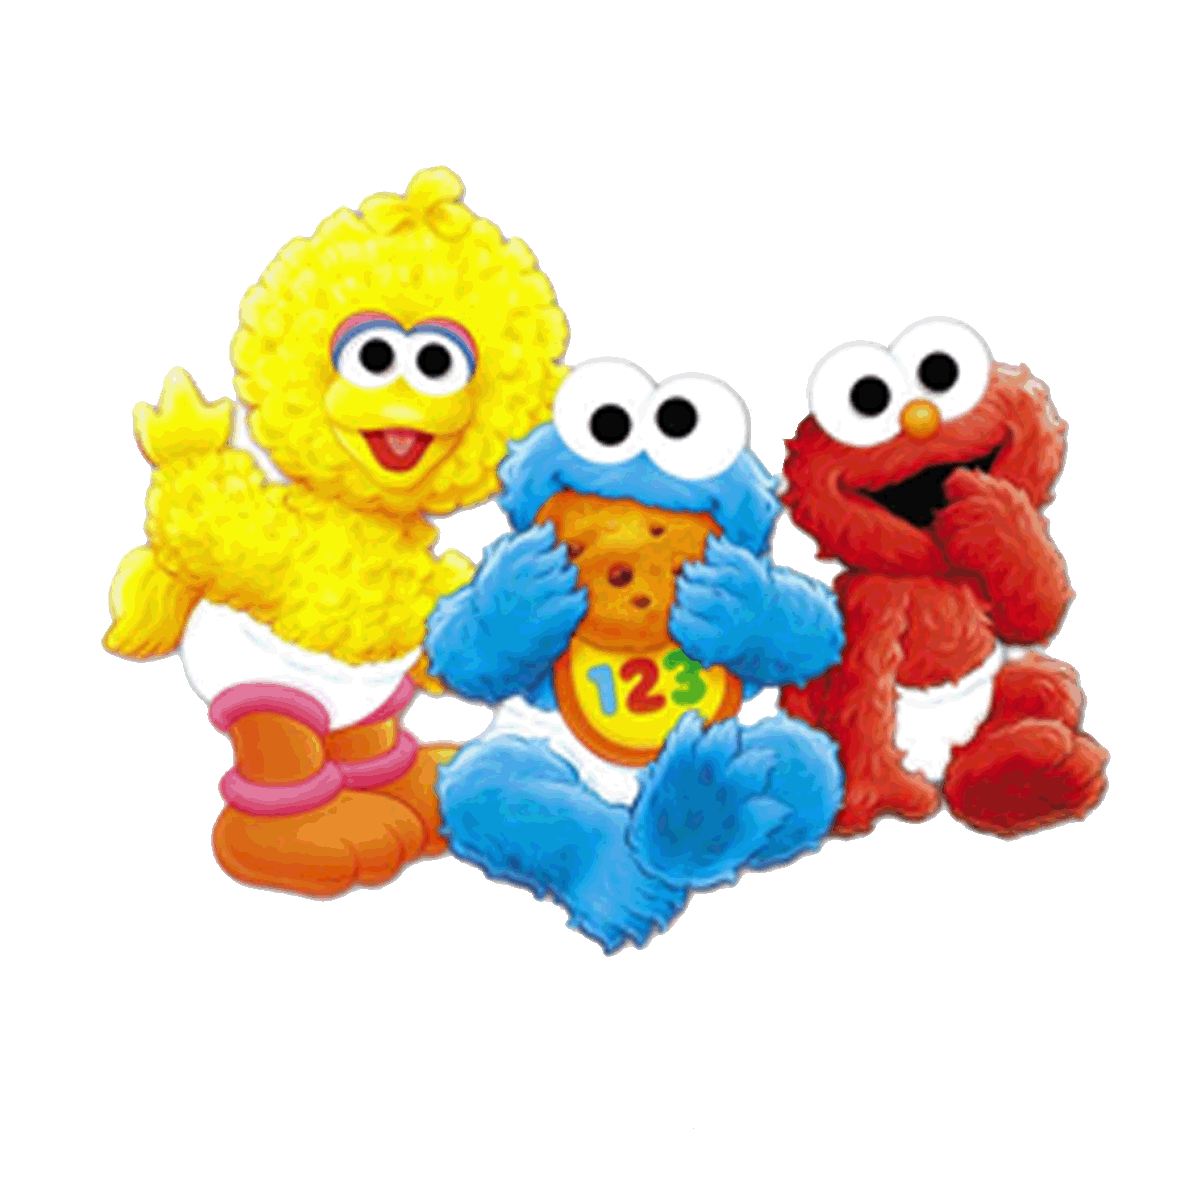 Diapers clipart elmo. Cookie monster as a